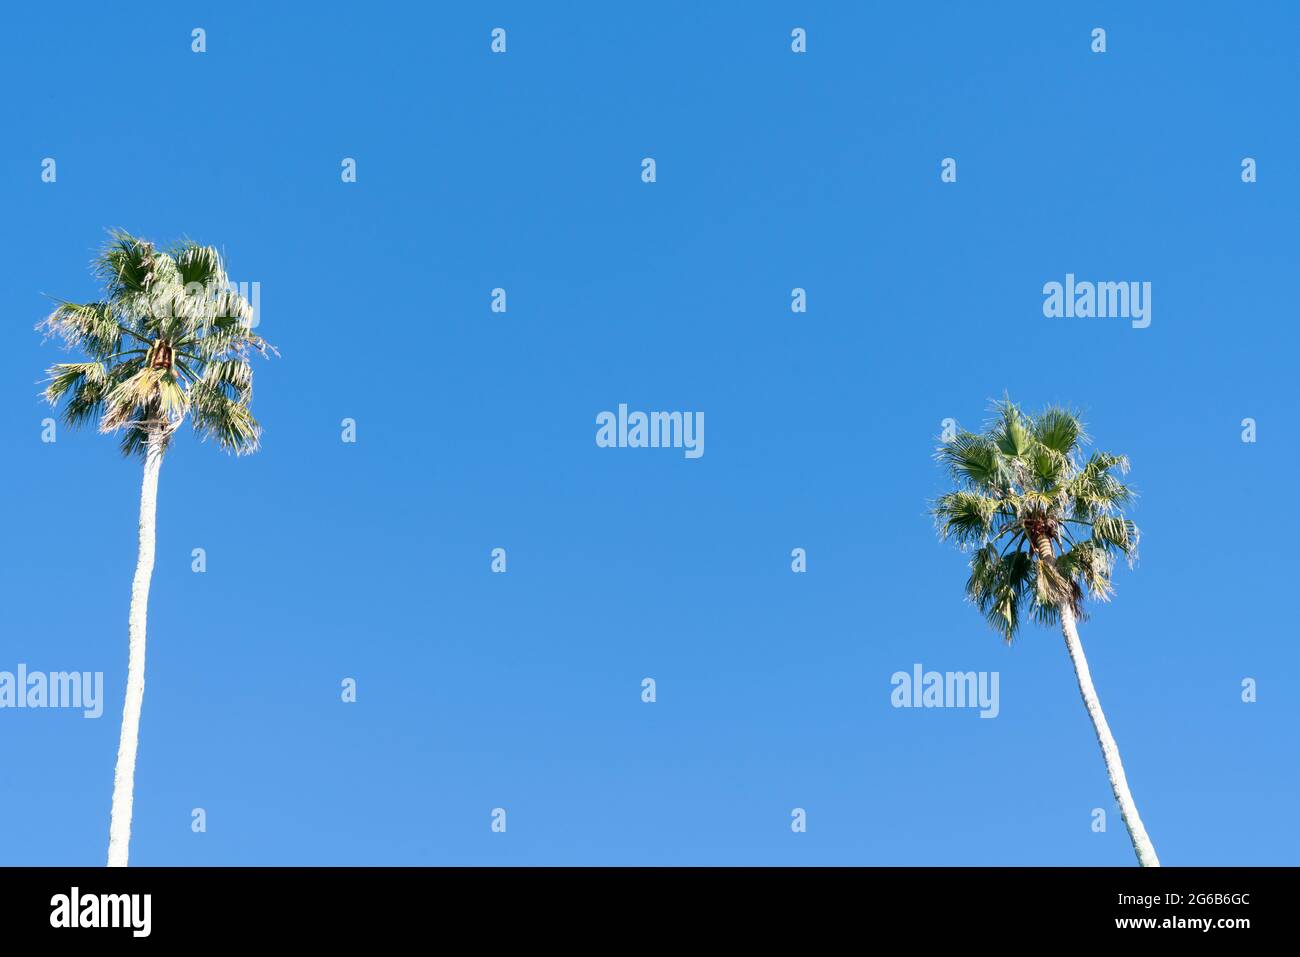 Tall California fan palm trees against blue sky with their long spindly trunks project skyward. Stock Photo